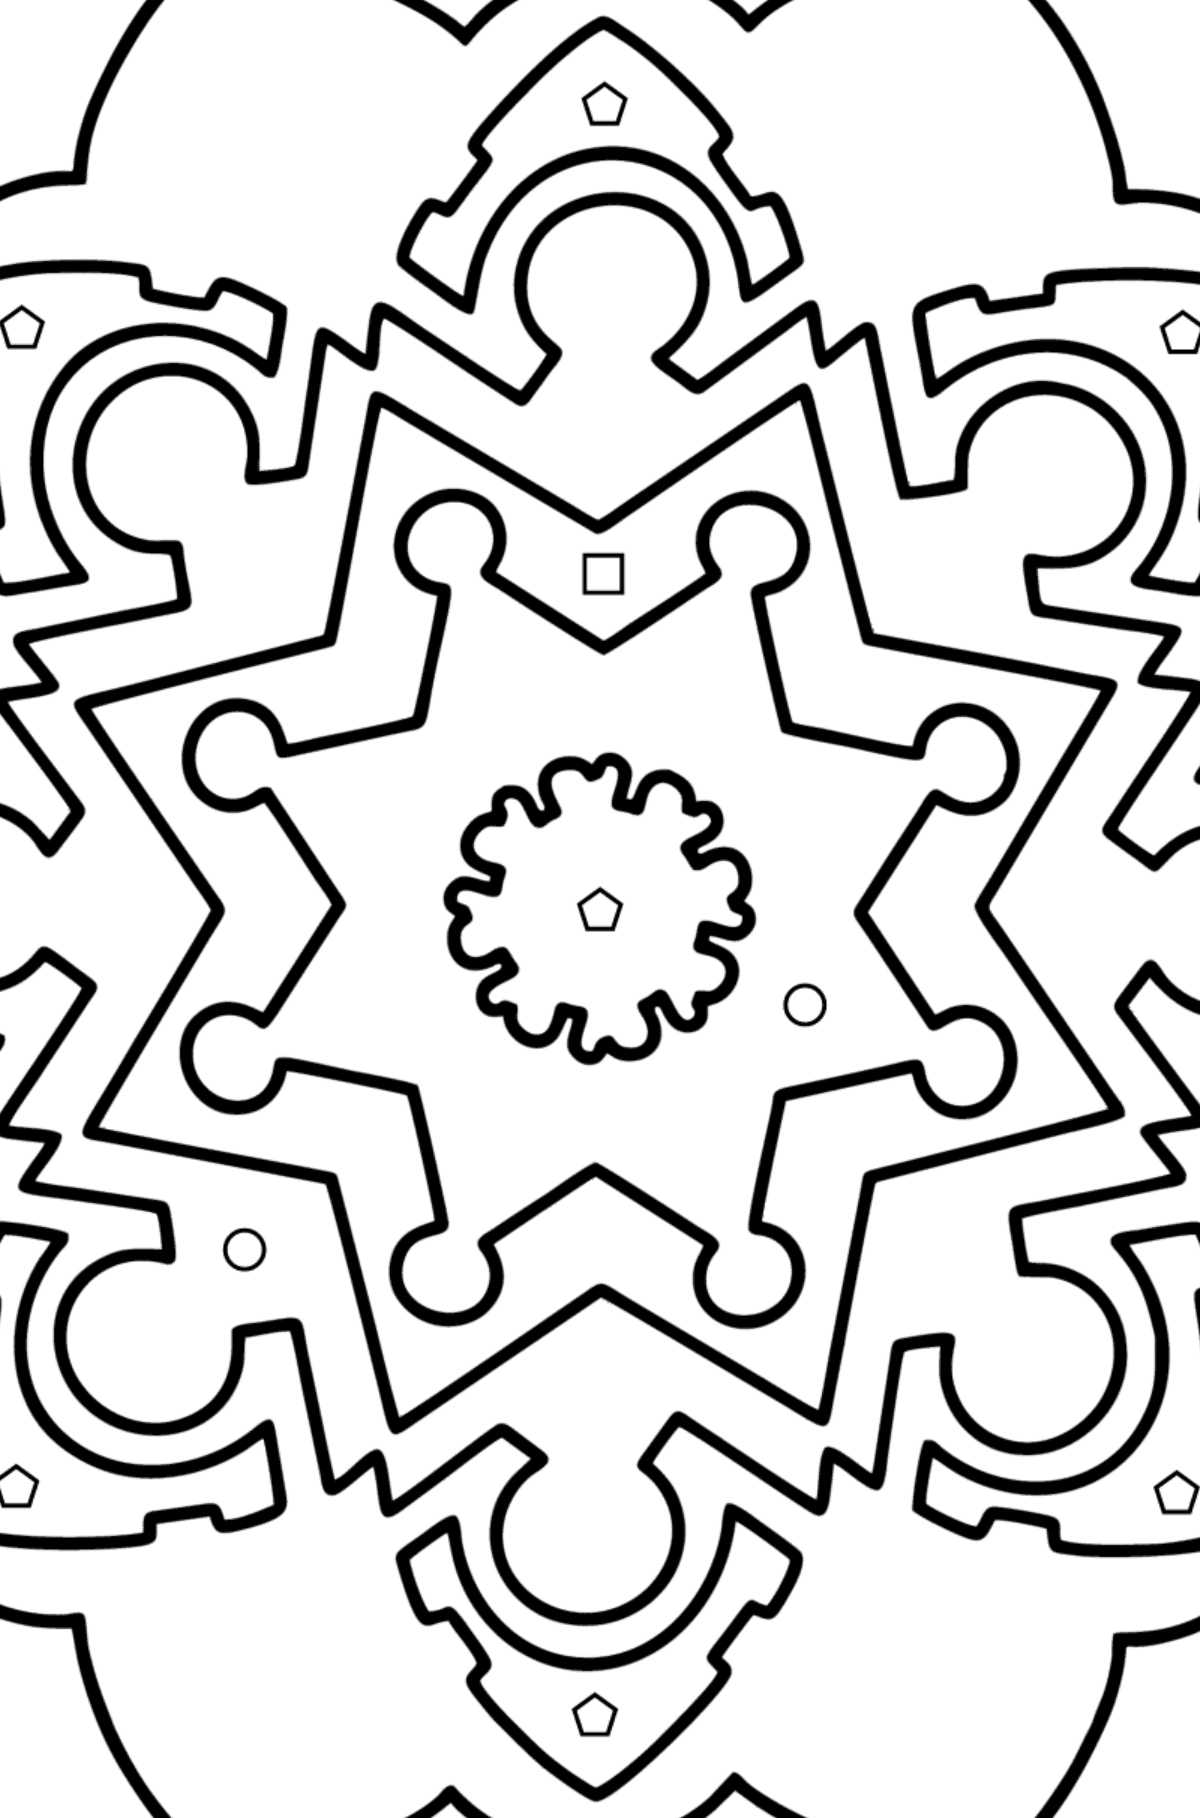 Mandala coloring page - 13 parts - Coloring by Geometric Shapes for Kids